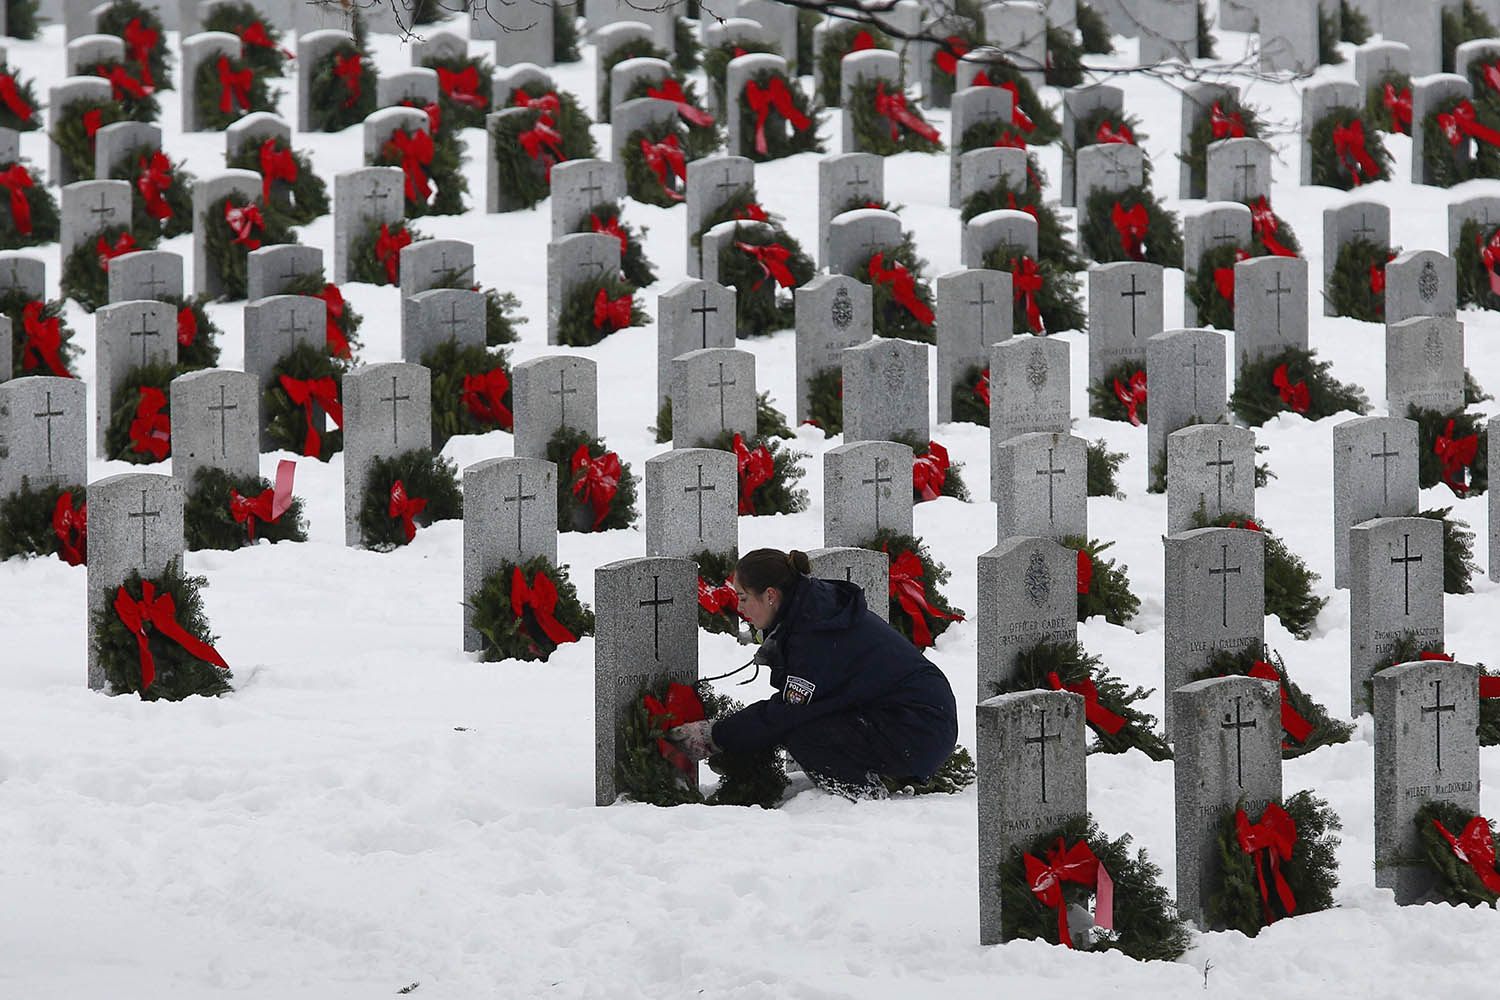 A woman adjusts a wreath during the Wreaths Across Canada ceremony at the National Military Cemetery in Ottawa